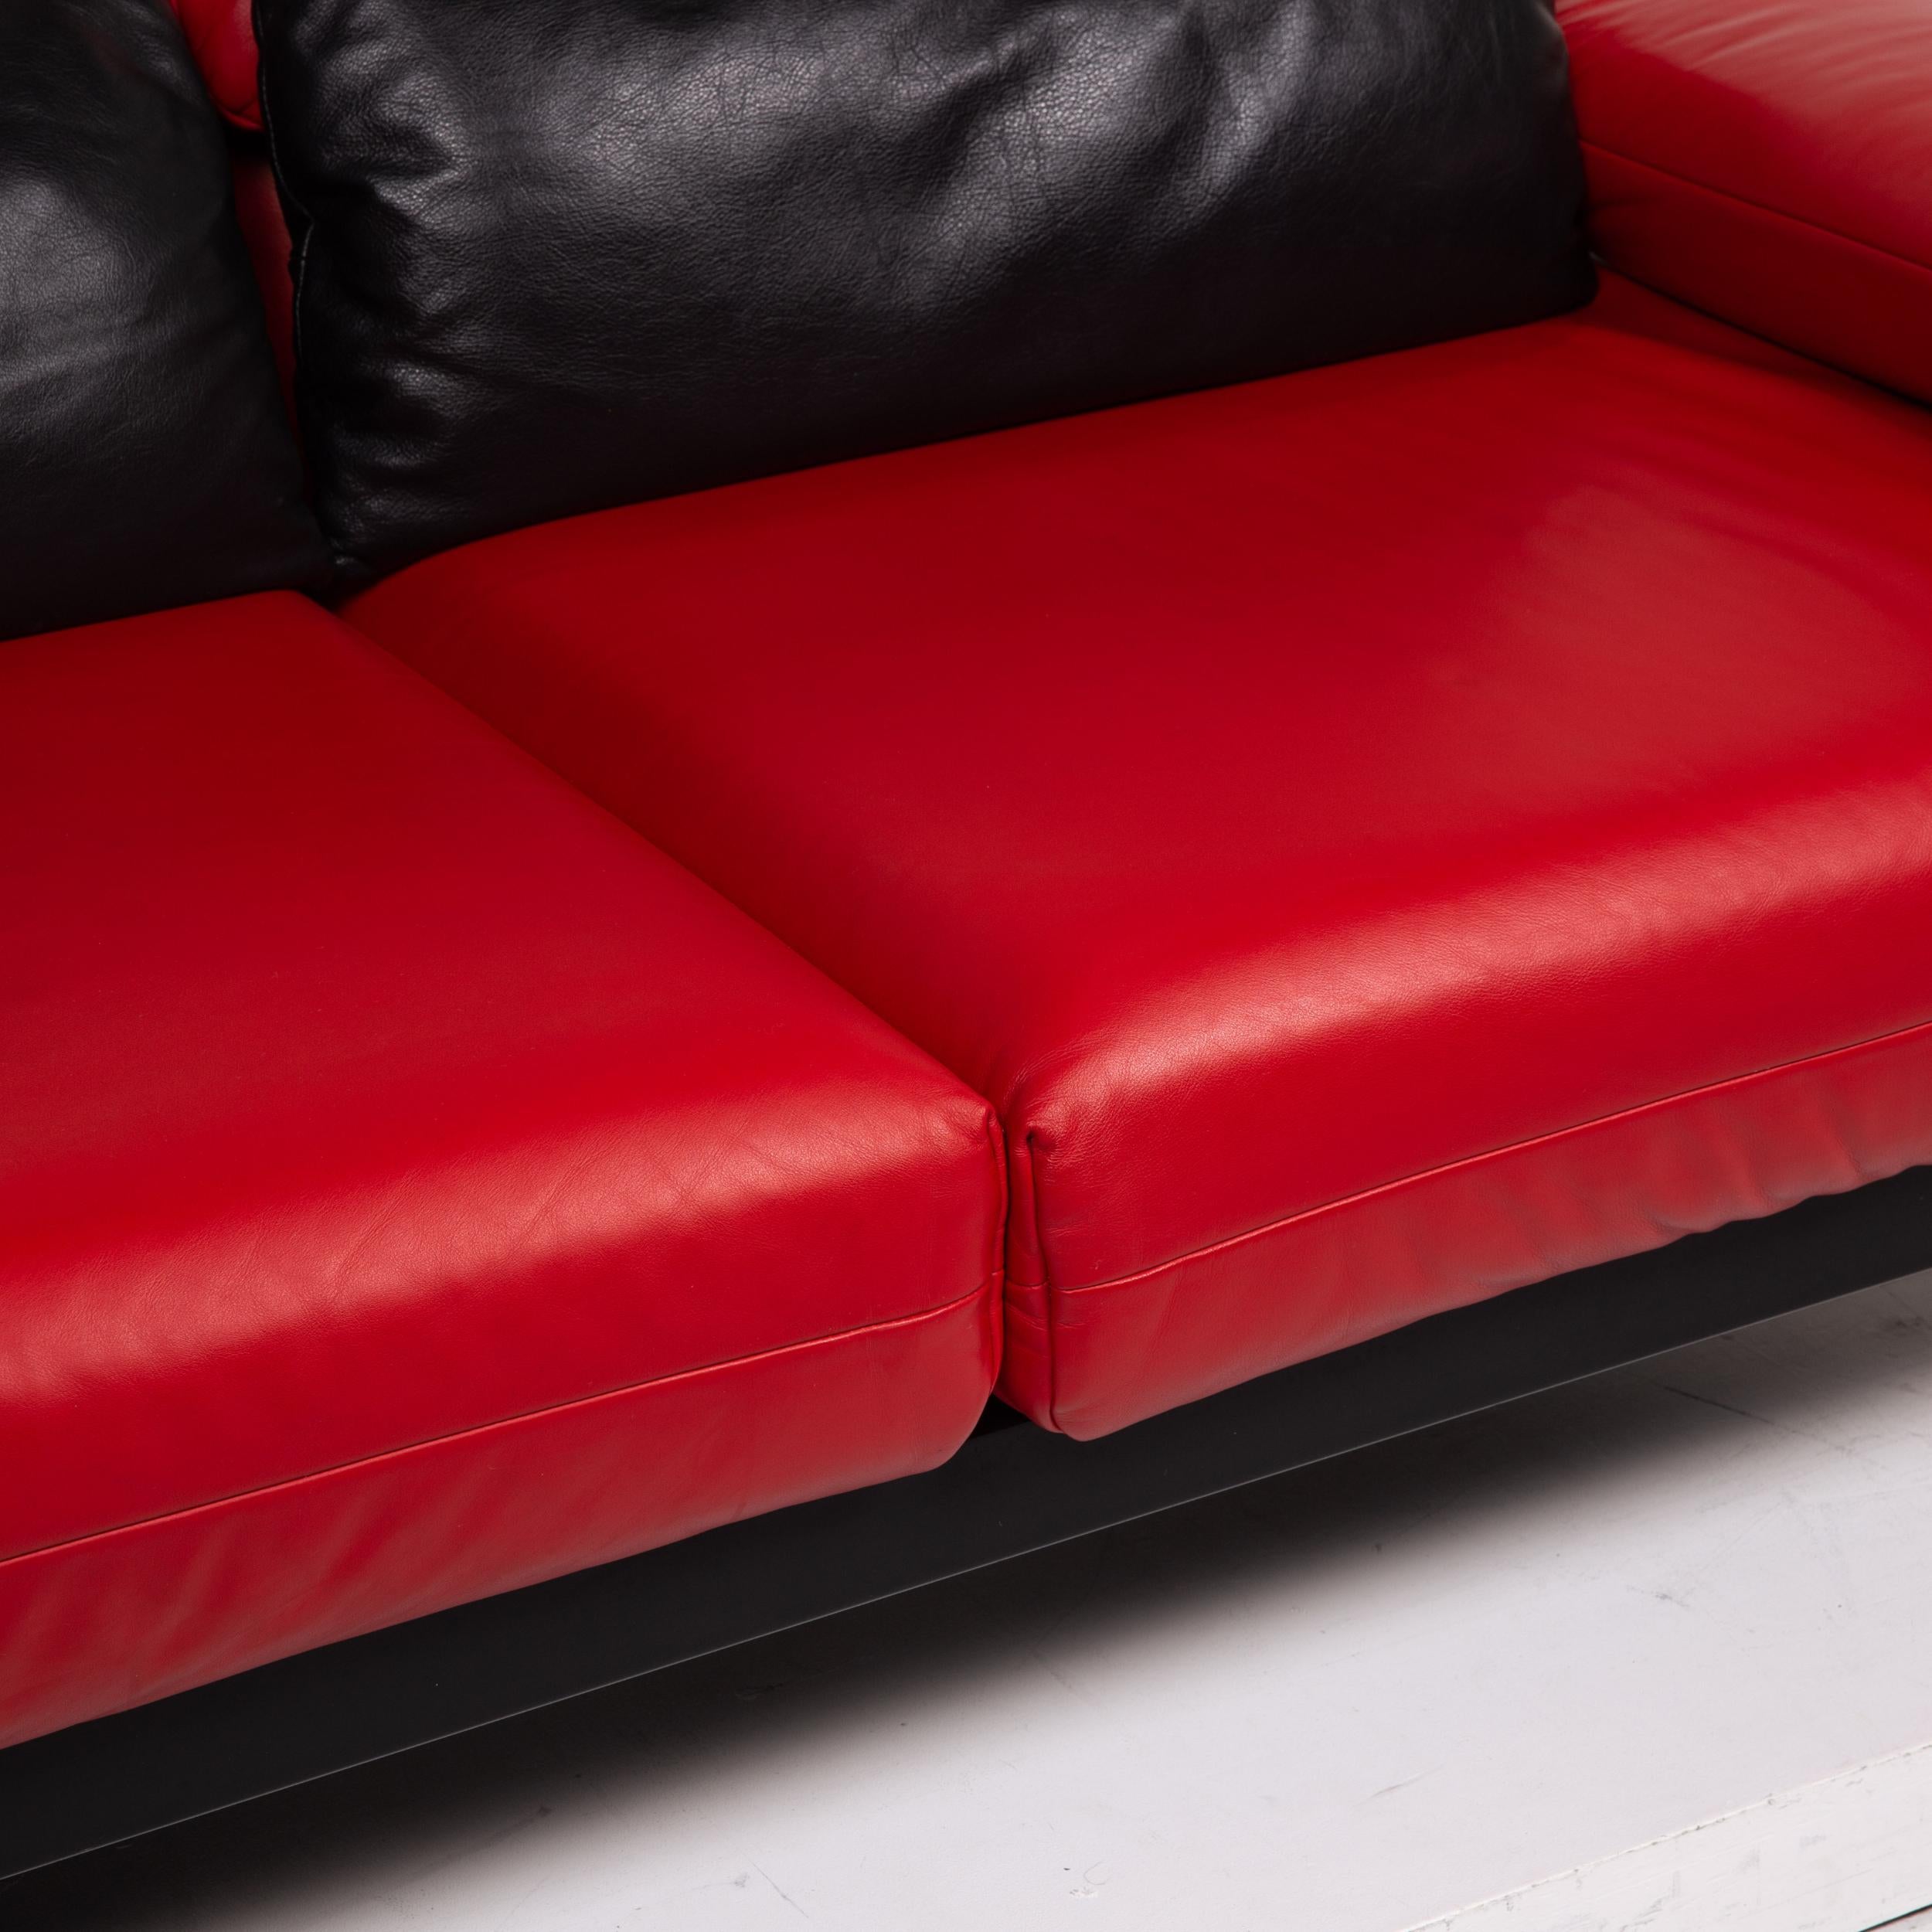 German Rolf Benz Plura Leather Sofa Red Black Two-Seat Function Relax Function Couch For Sale